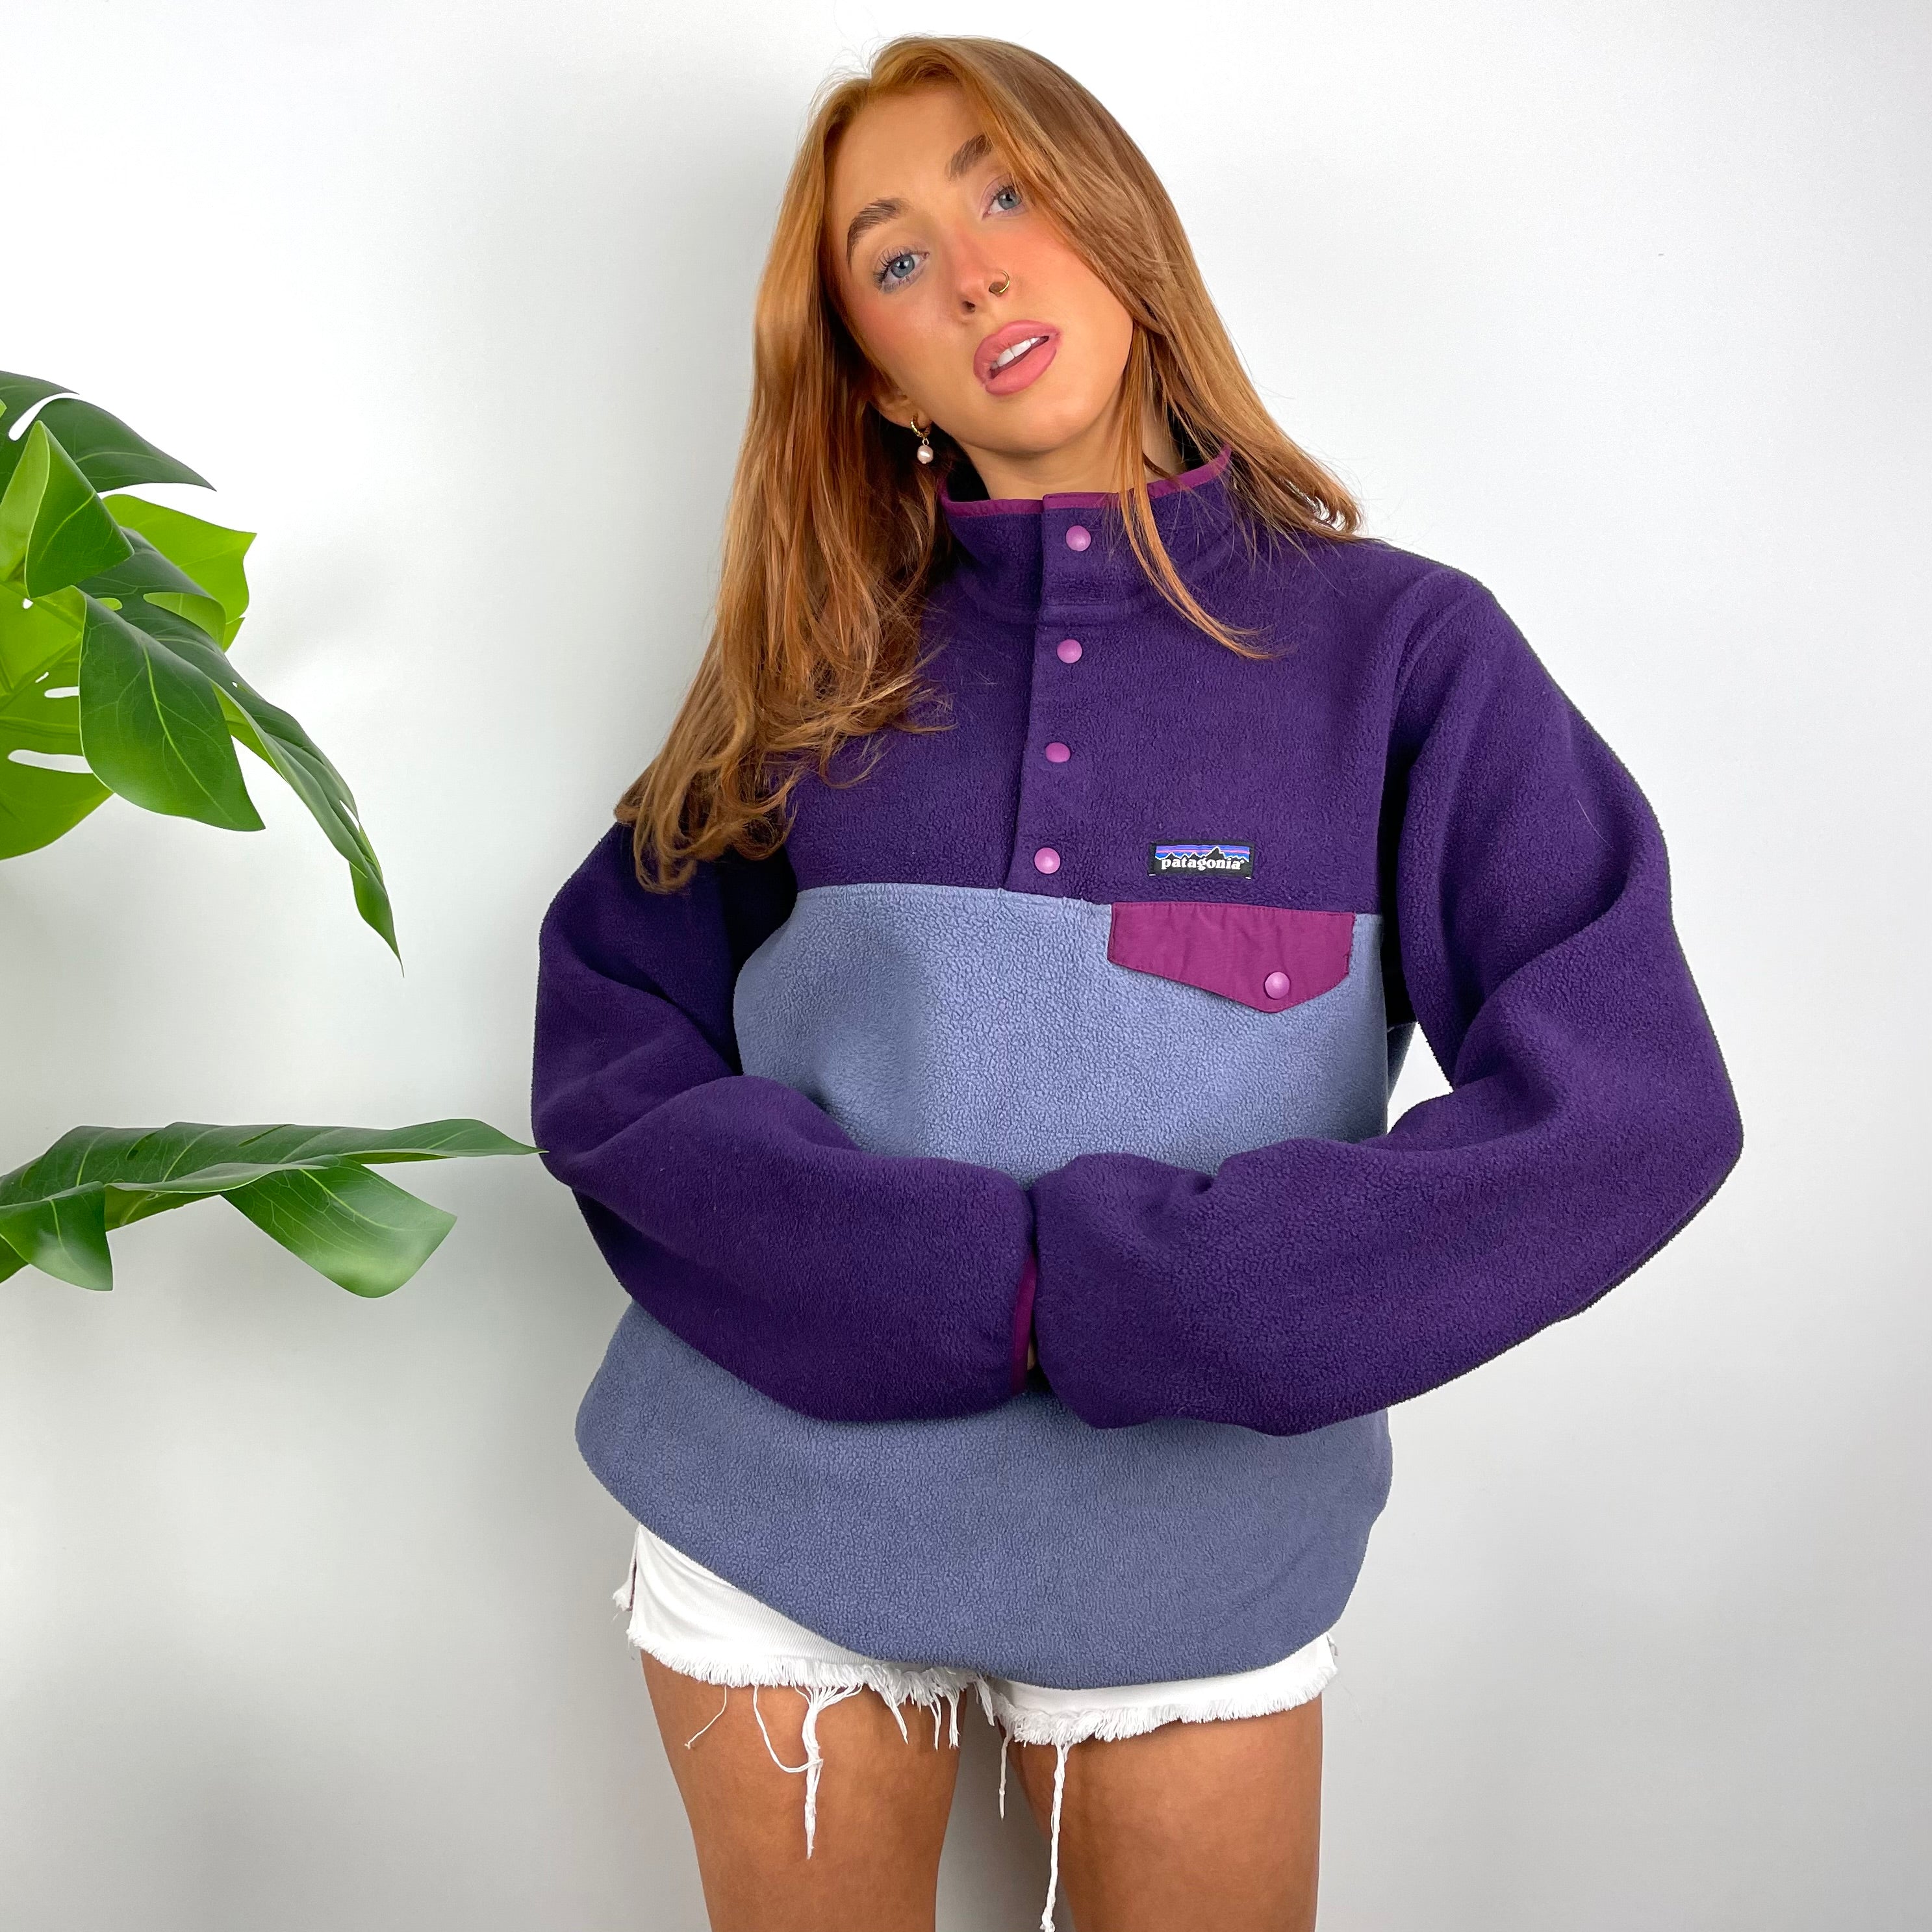 Patagonia RARE Purple & Violet Embroidered Spell Out Teddy Bear Fleece Button Sweatshirt (L)